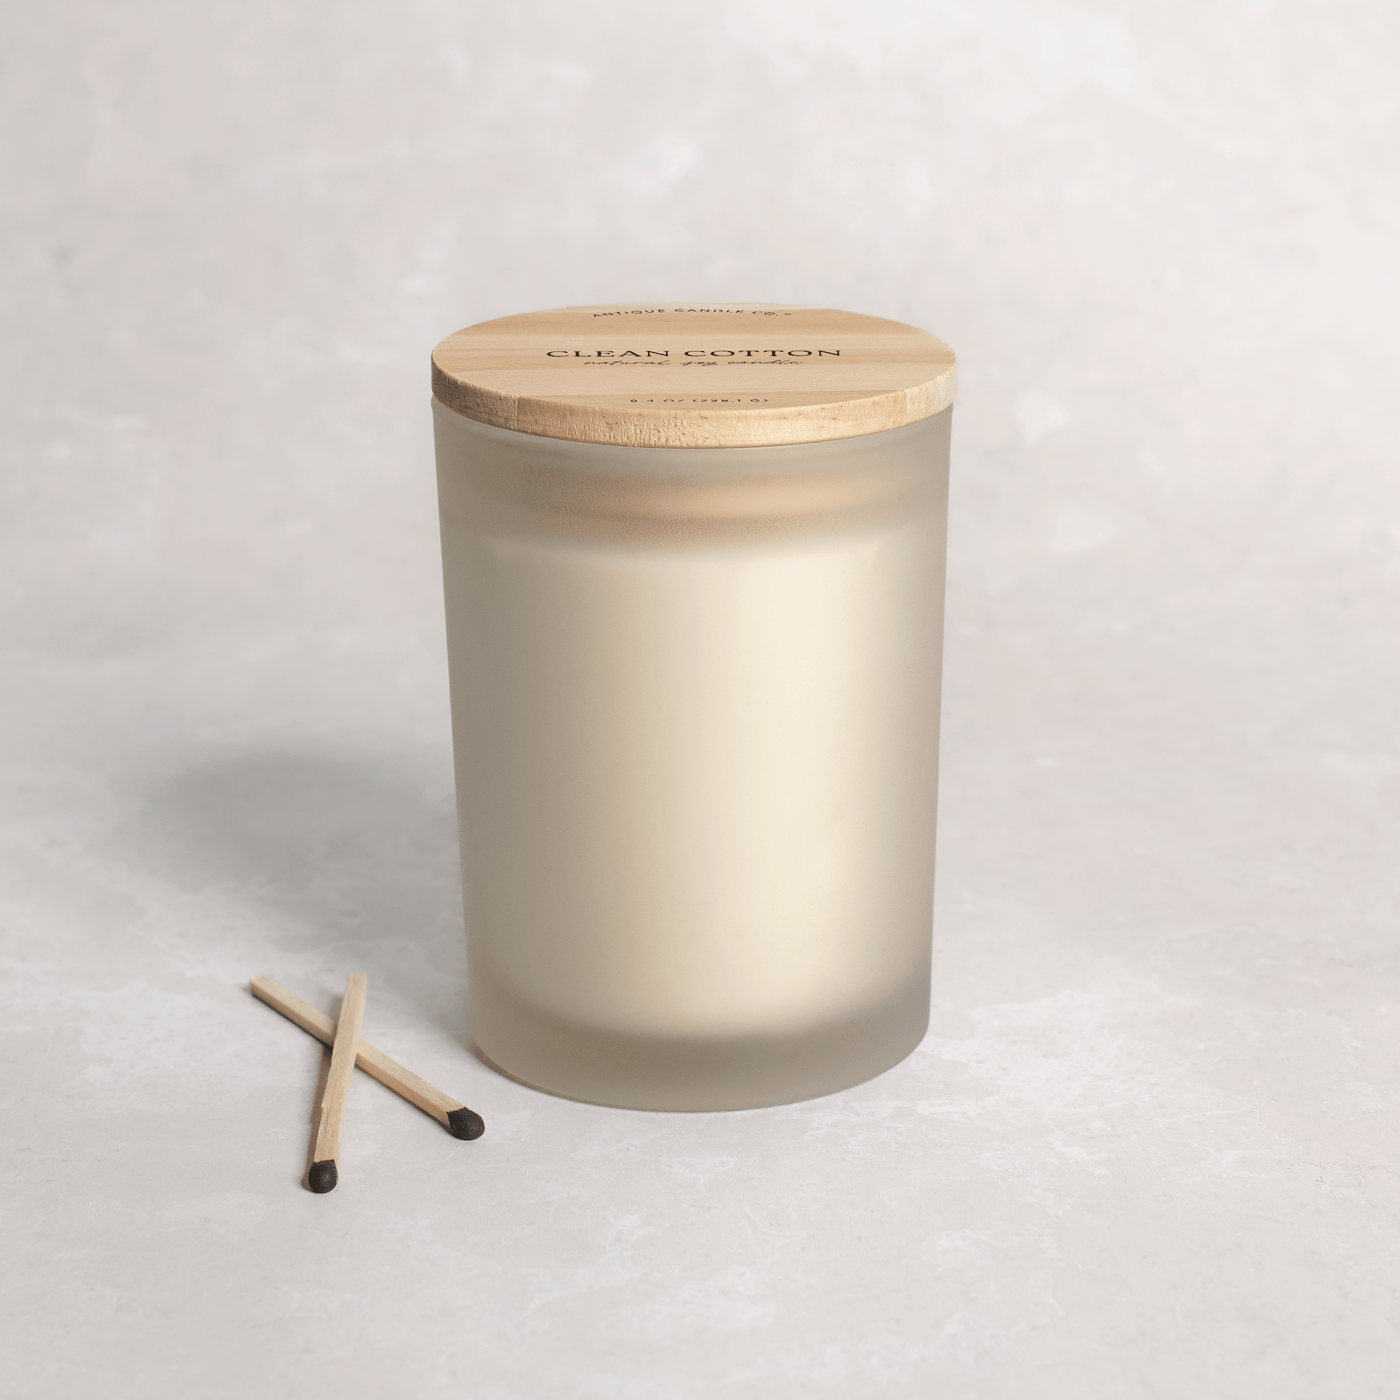 Soy Wax Luxe Candle - Clean Cotton